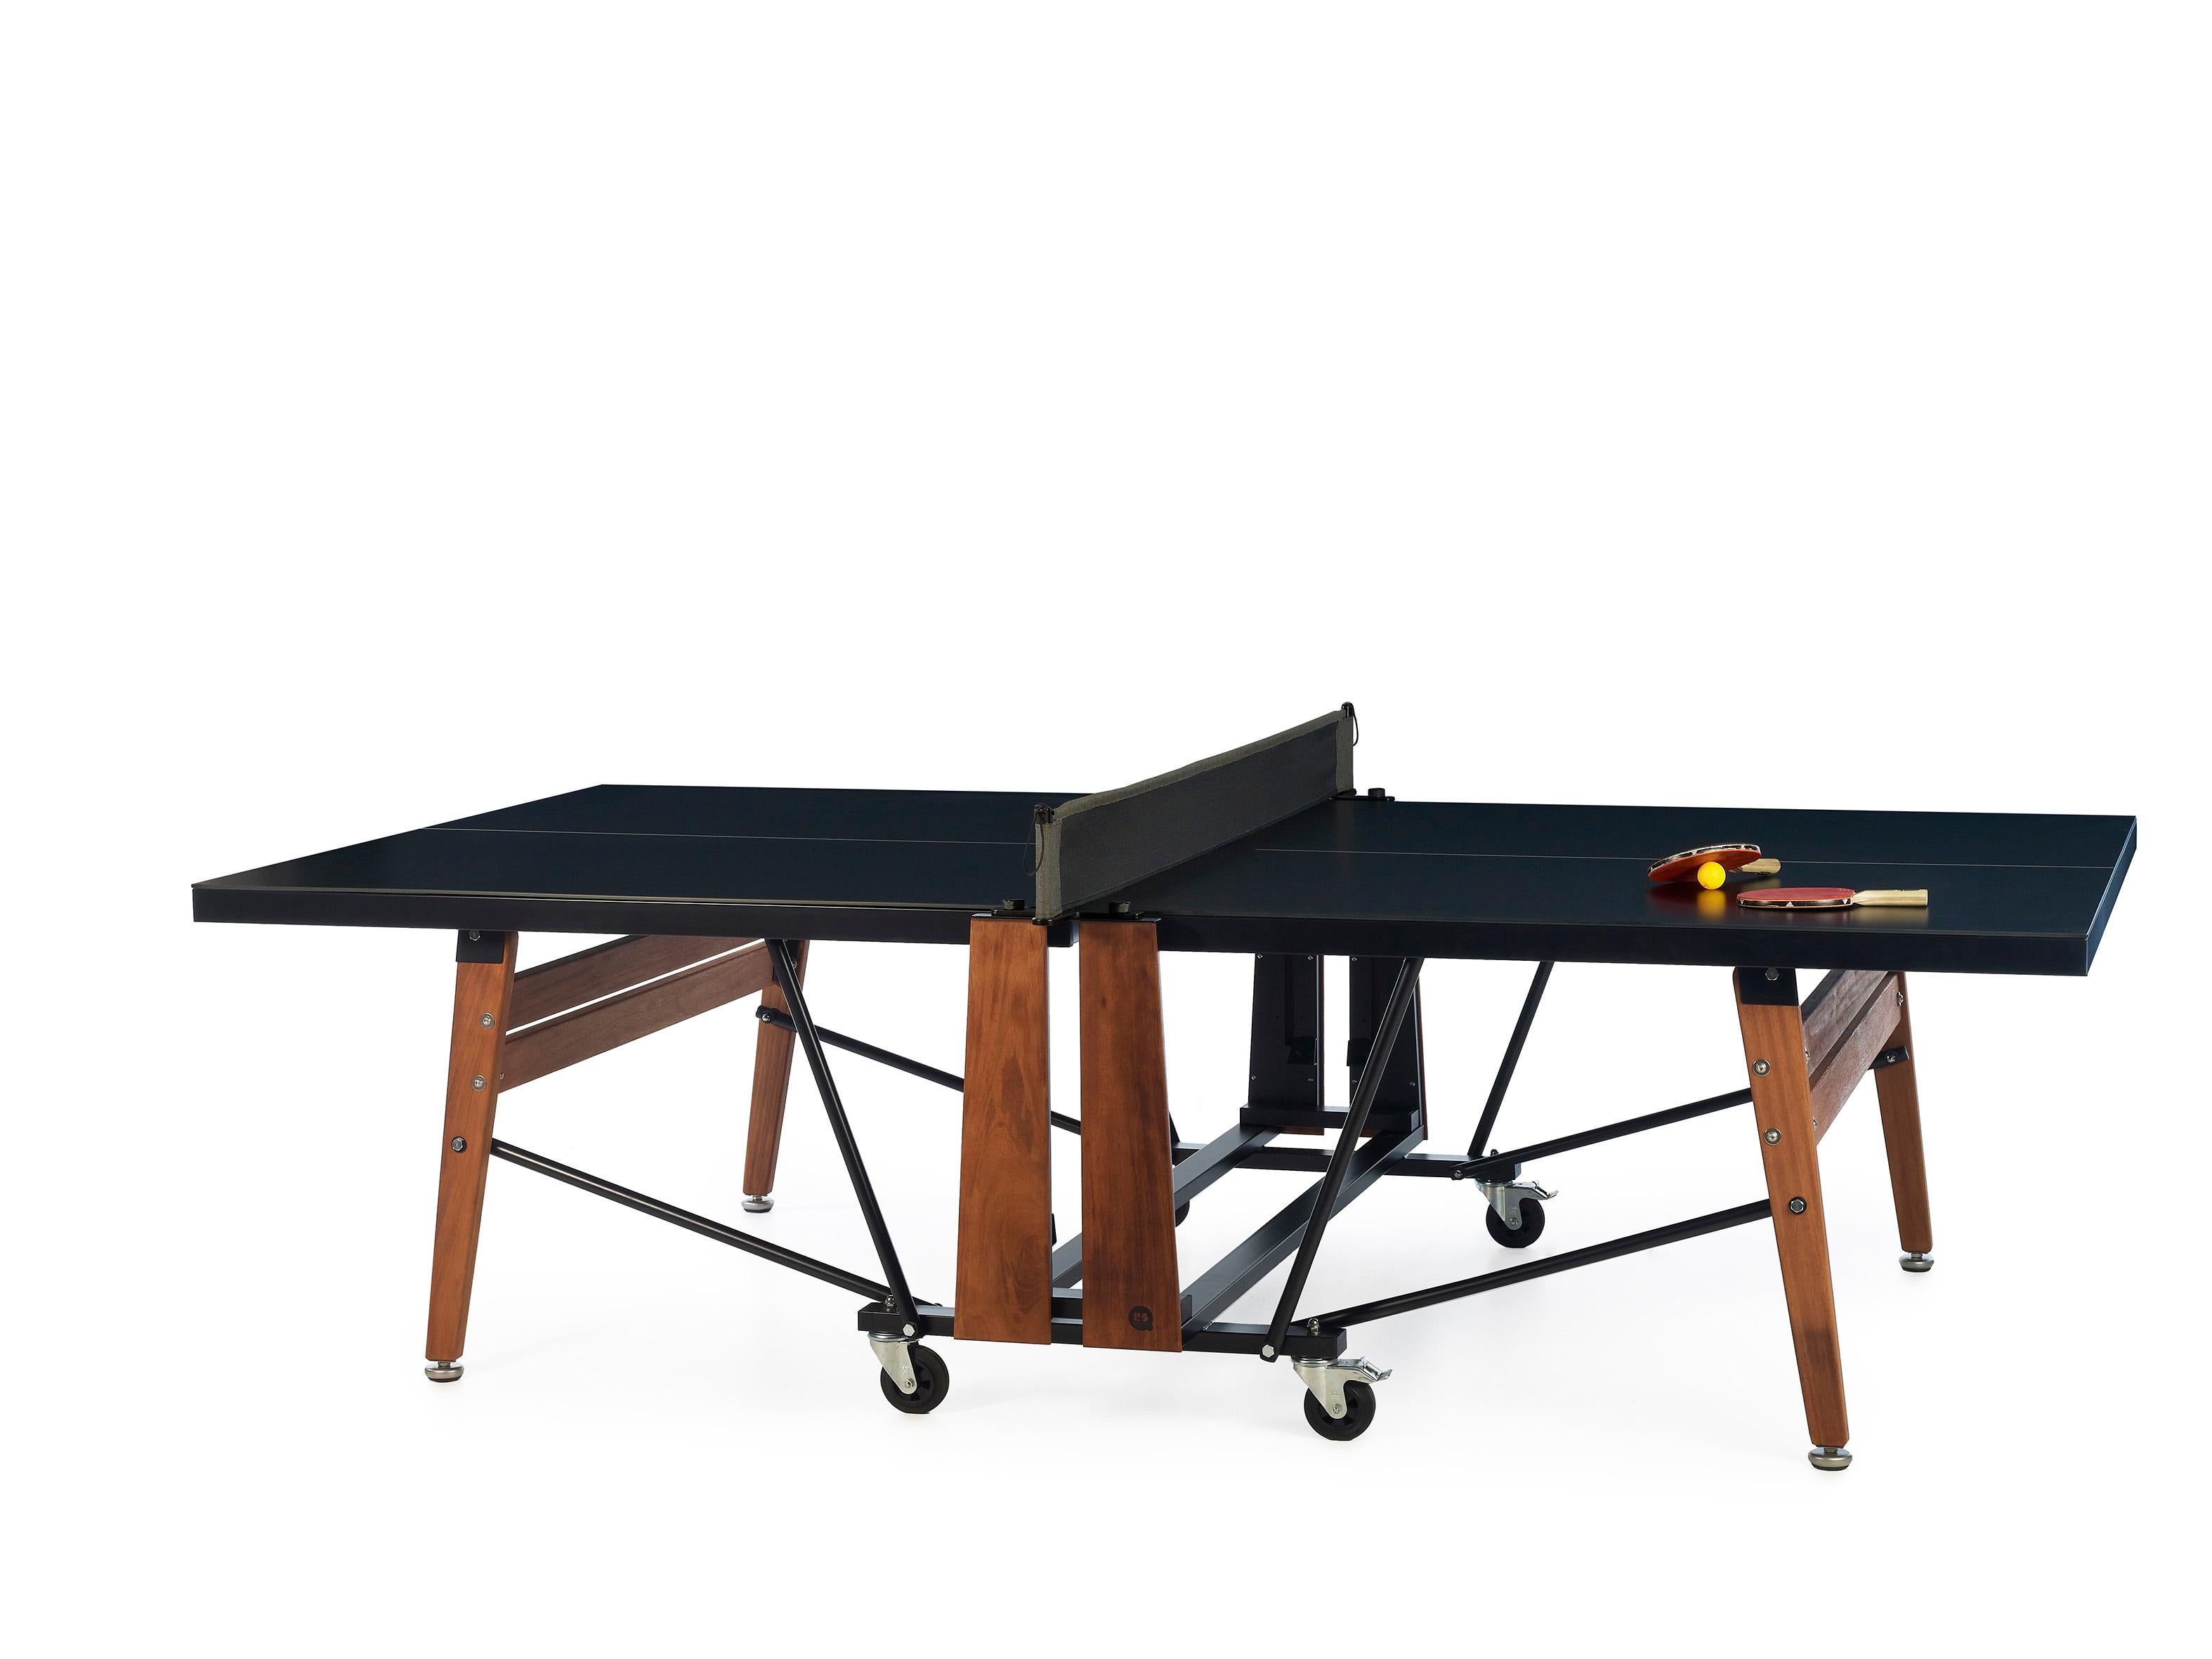 The RS Ping-Pong folding table is a new folding table concept. It restores its design to its rightful place and combines the functionality of a folding ping-pong table with the signature design of RS Barcelona products. The RS Ping-Pong folding is